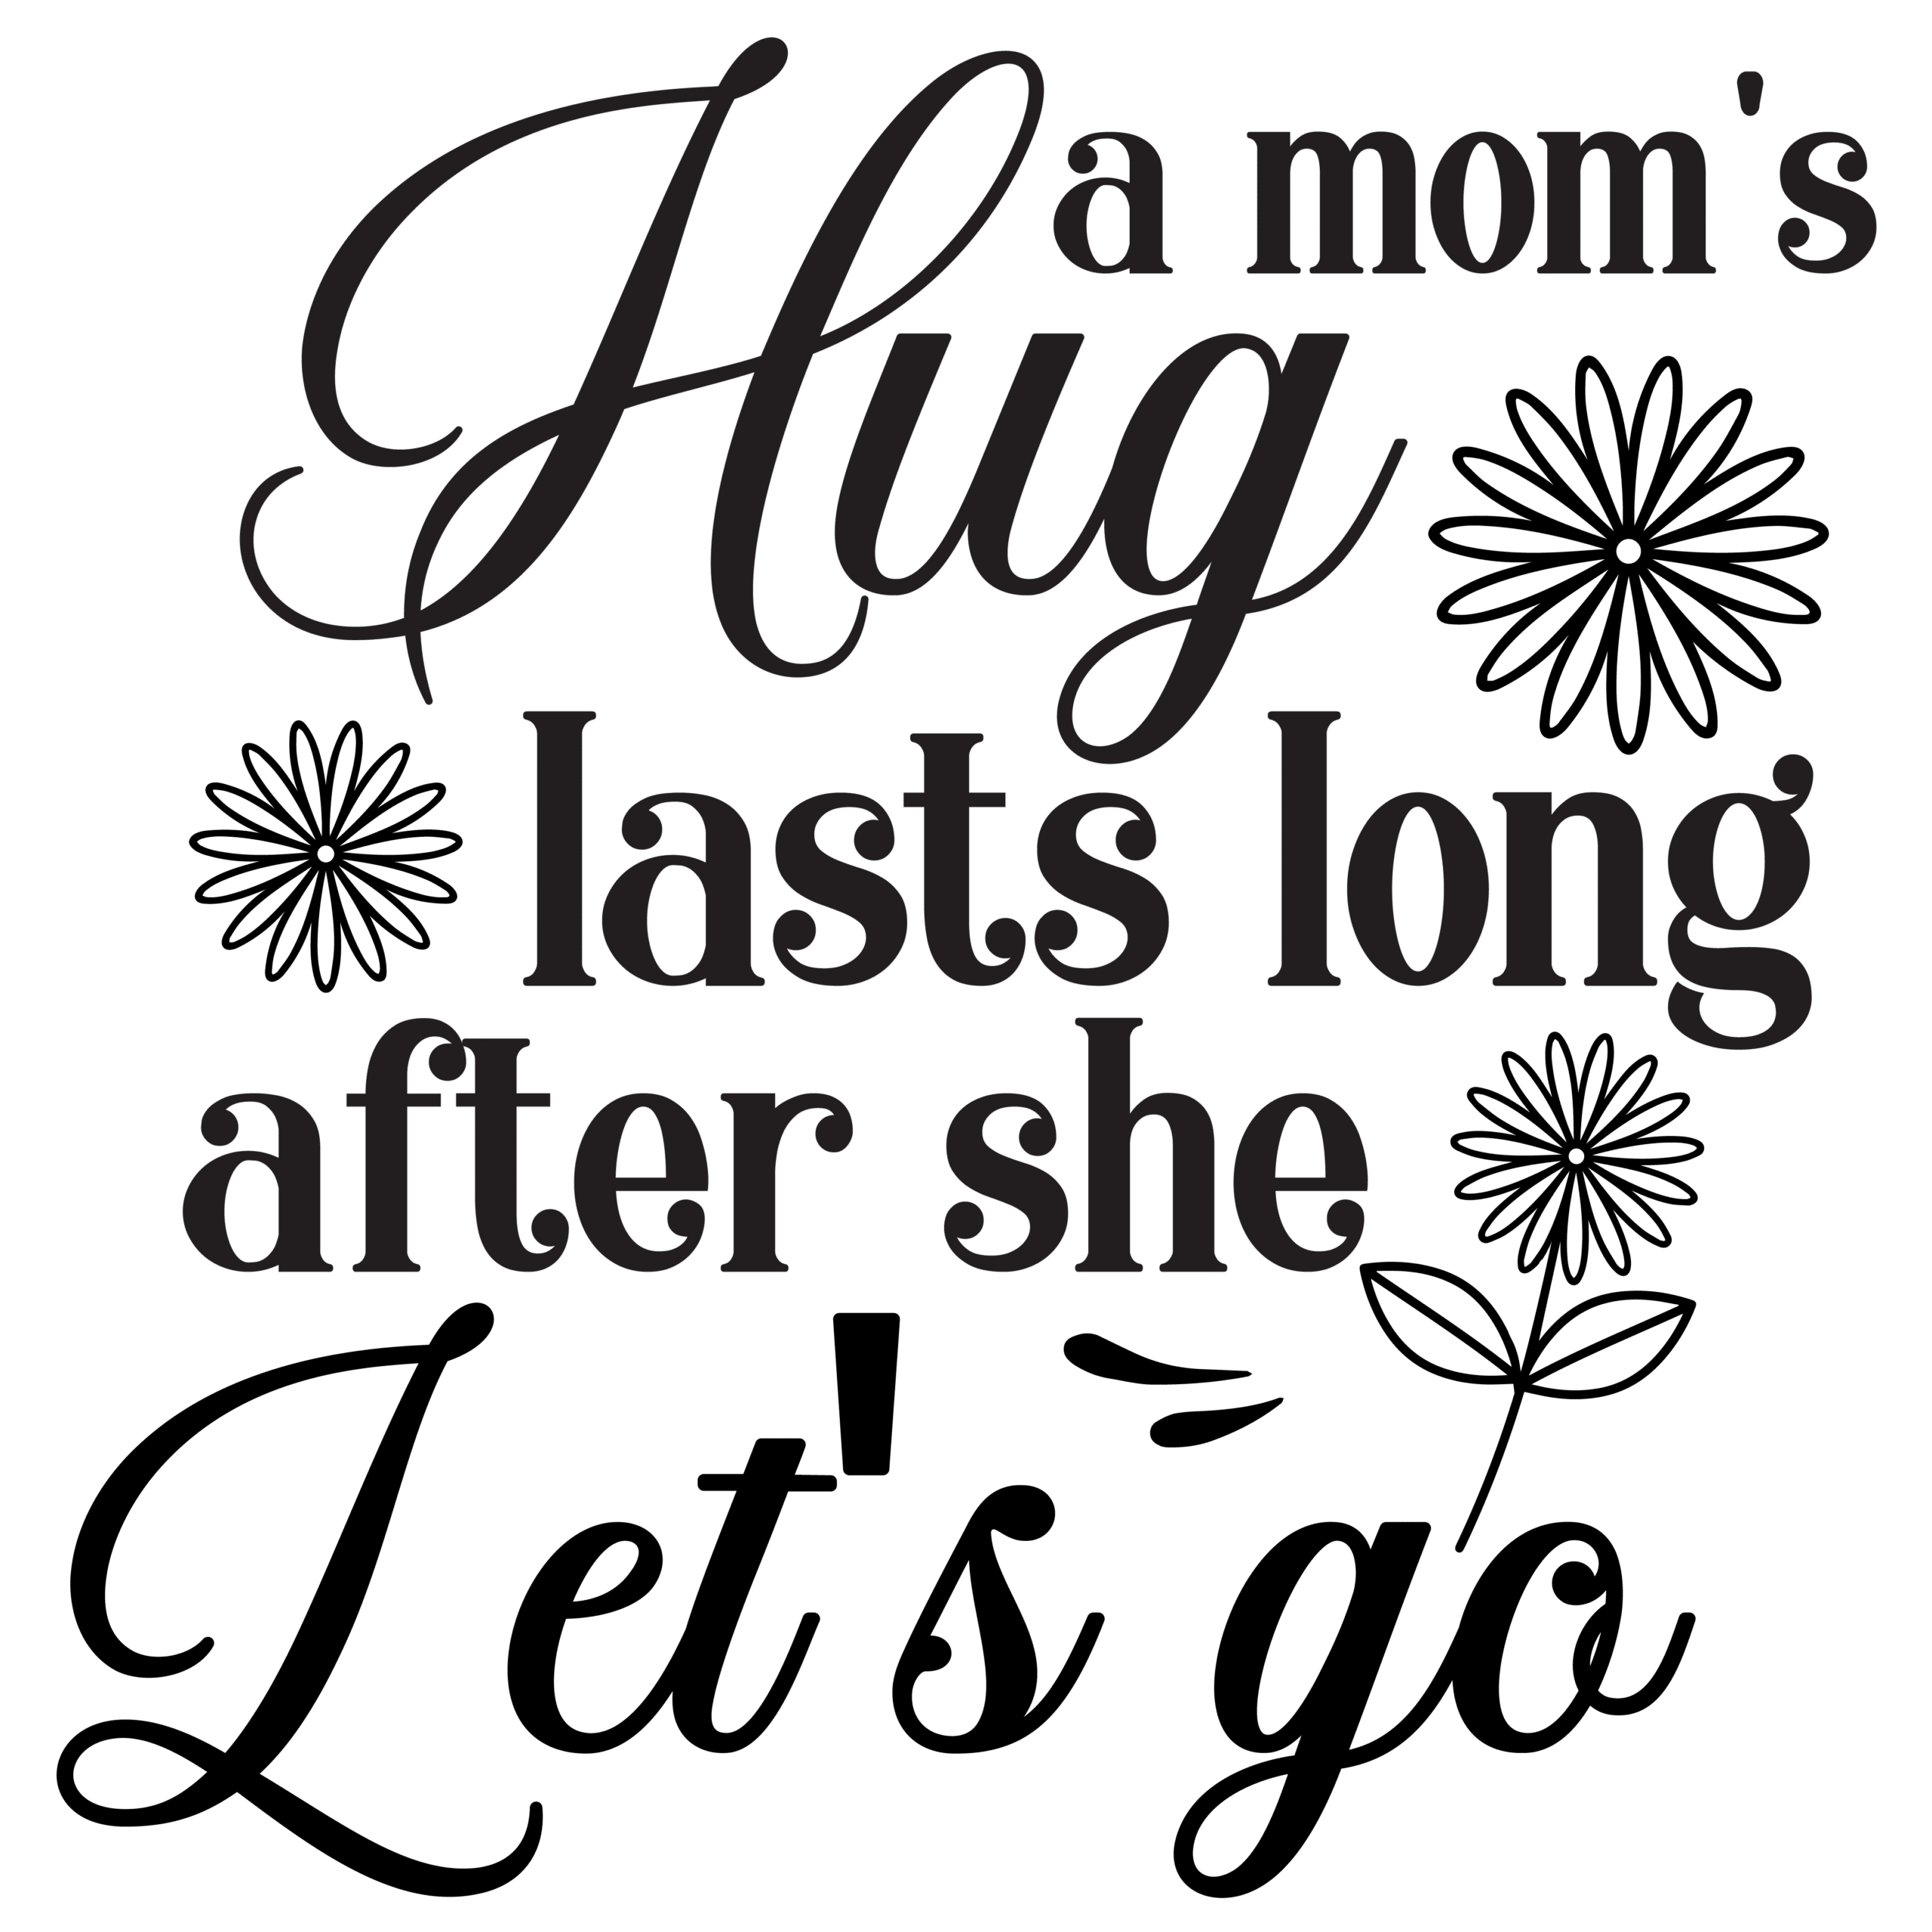 A mom's hug lasts long after she let's go-01